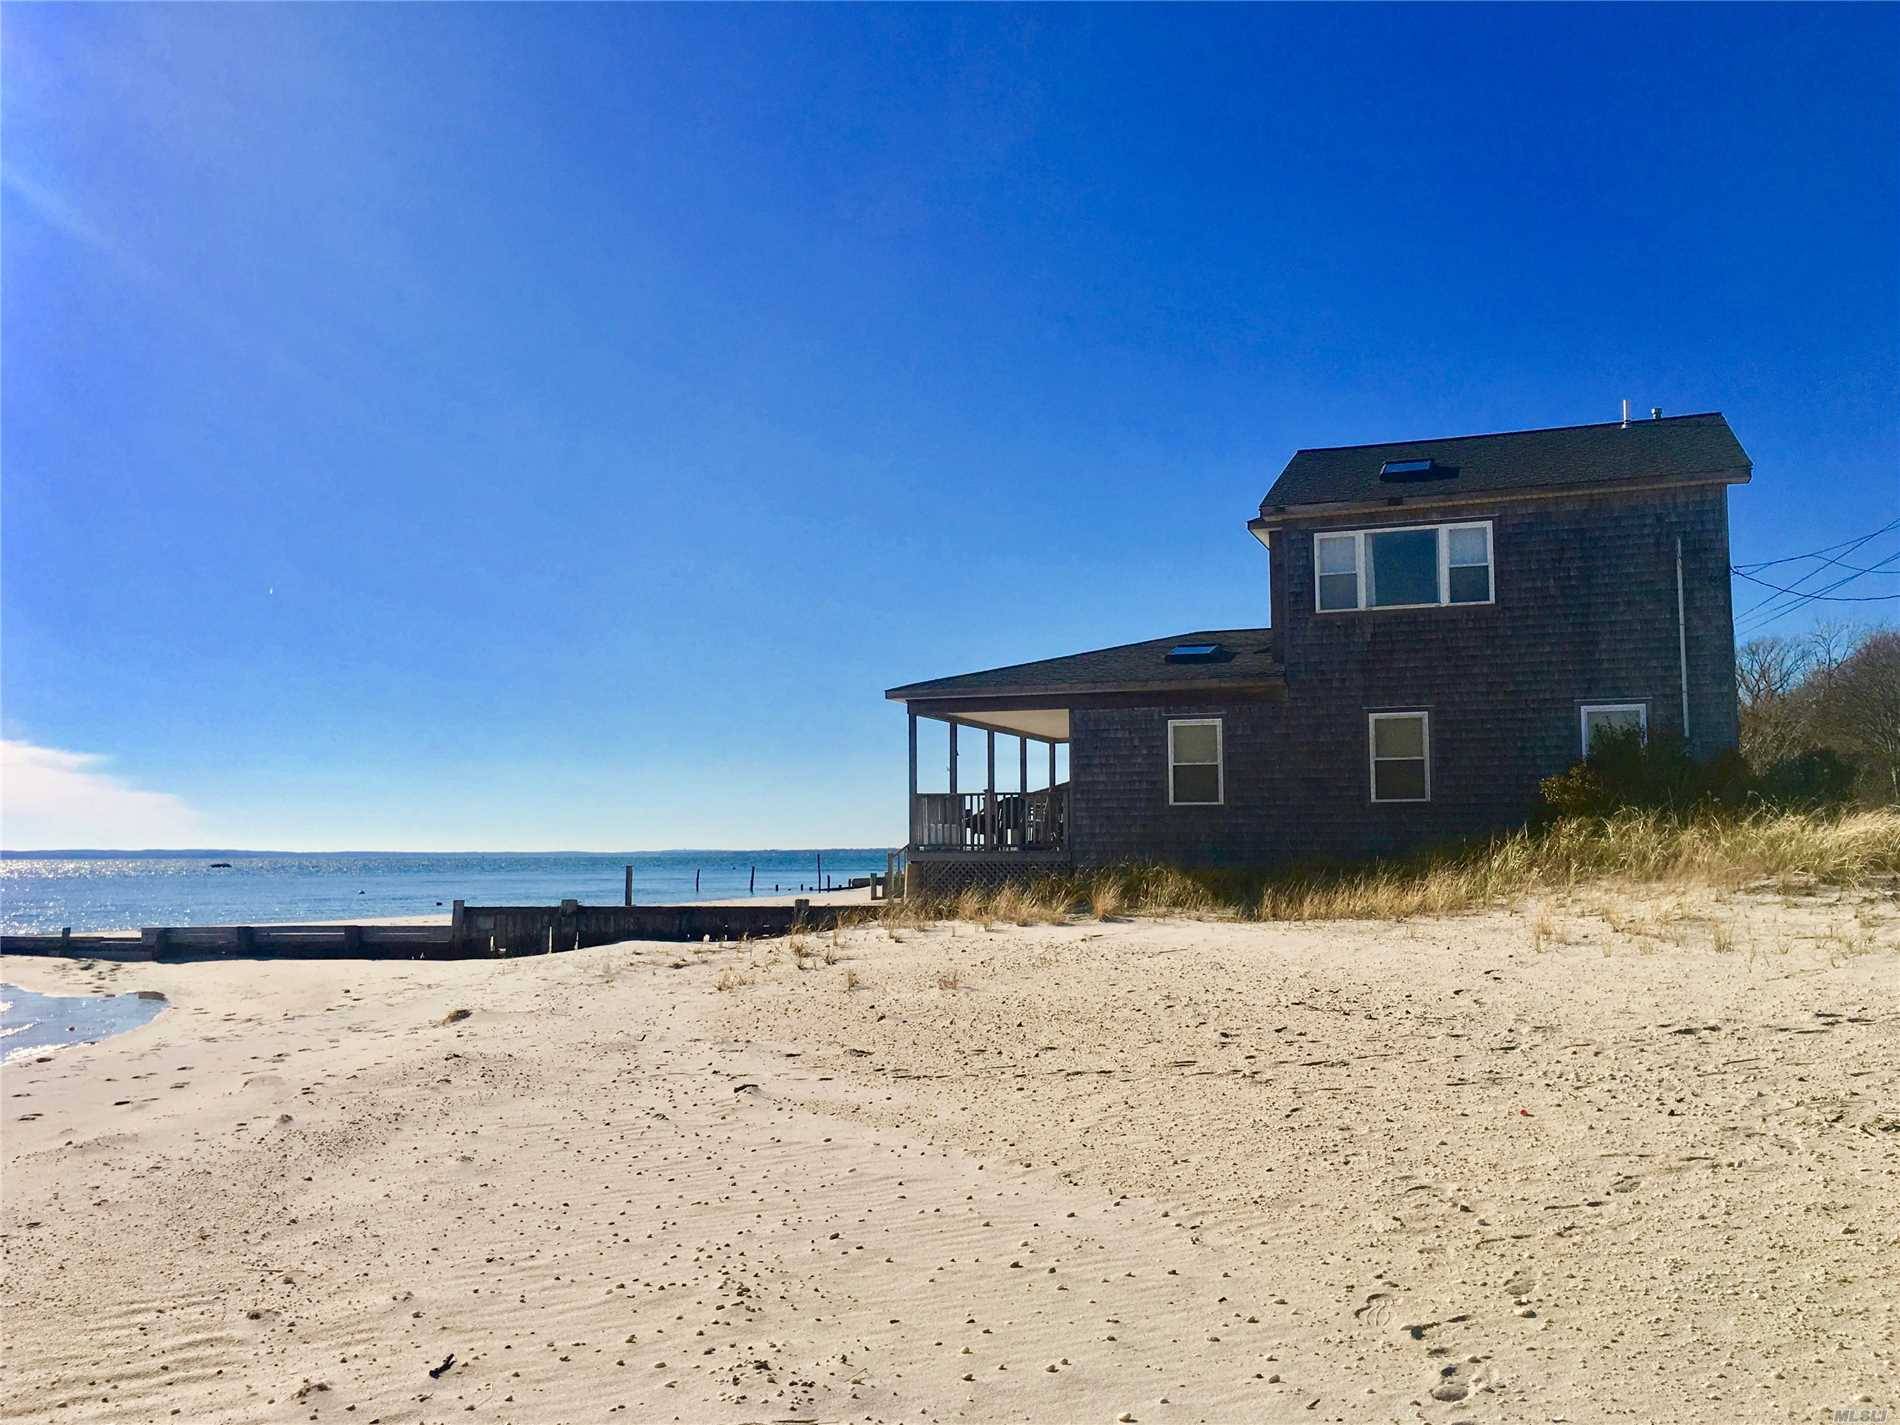 Classic North Fork Beach House In Highly Sought After New Suffolk With Private Sugar Sand Beach.